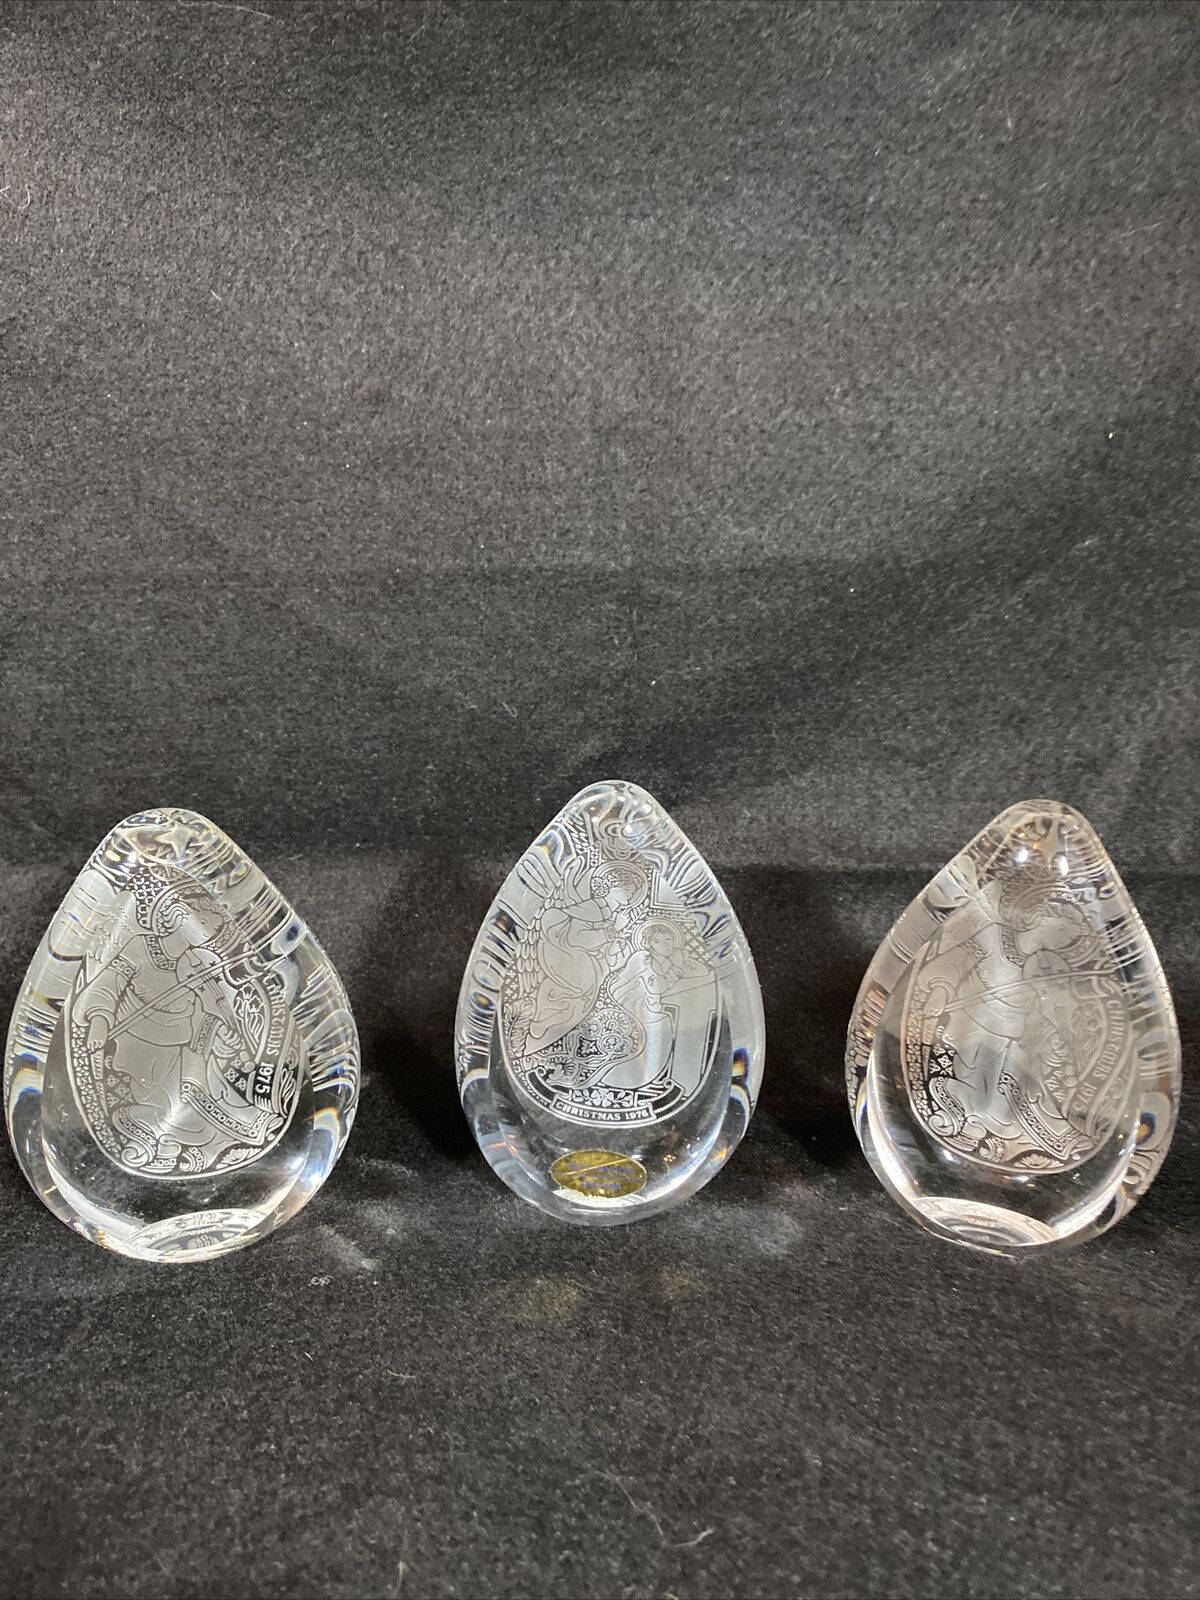 WEDGWOOD CRYSTAL 1975, 1976 CHRISTMAS GLASS PAPERWEIGHT 4.5” set of 3